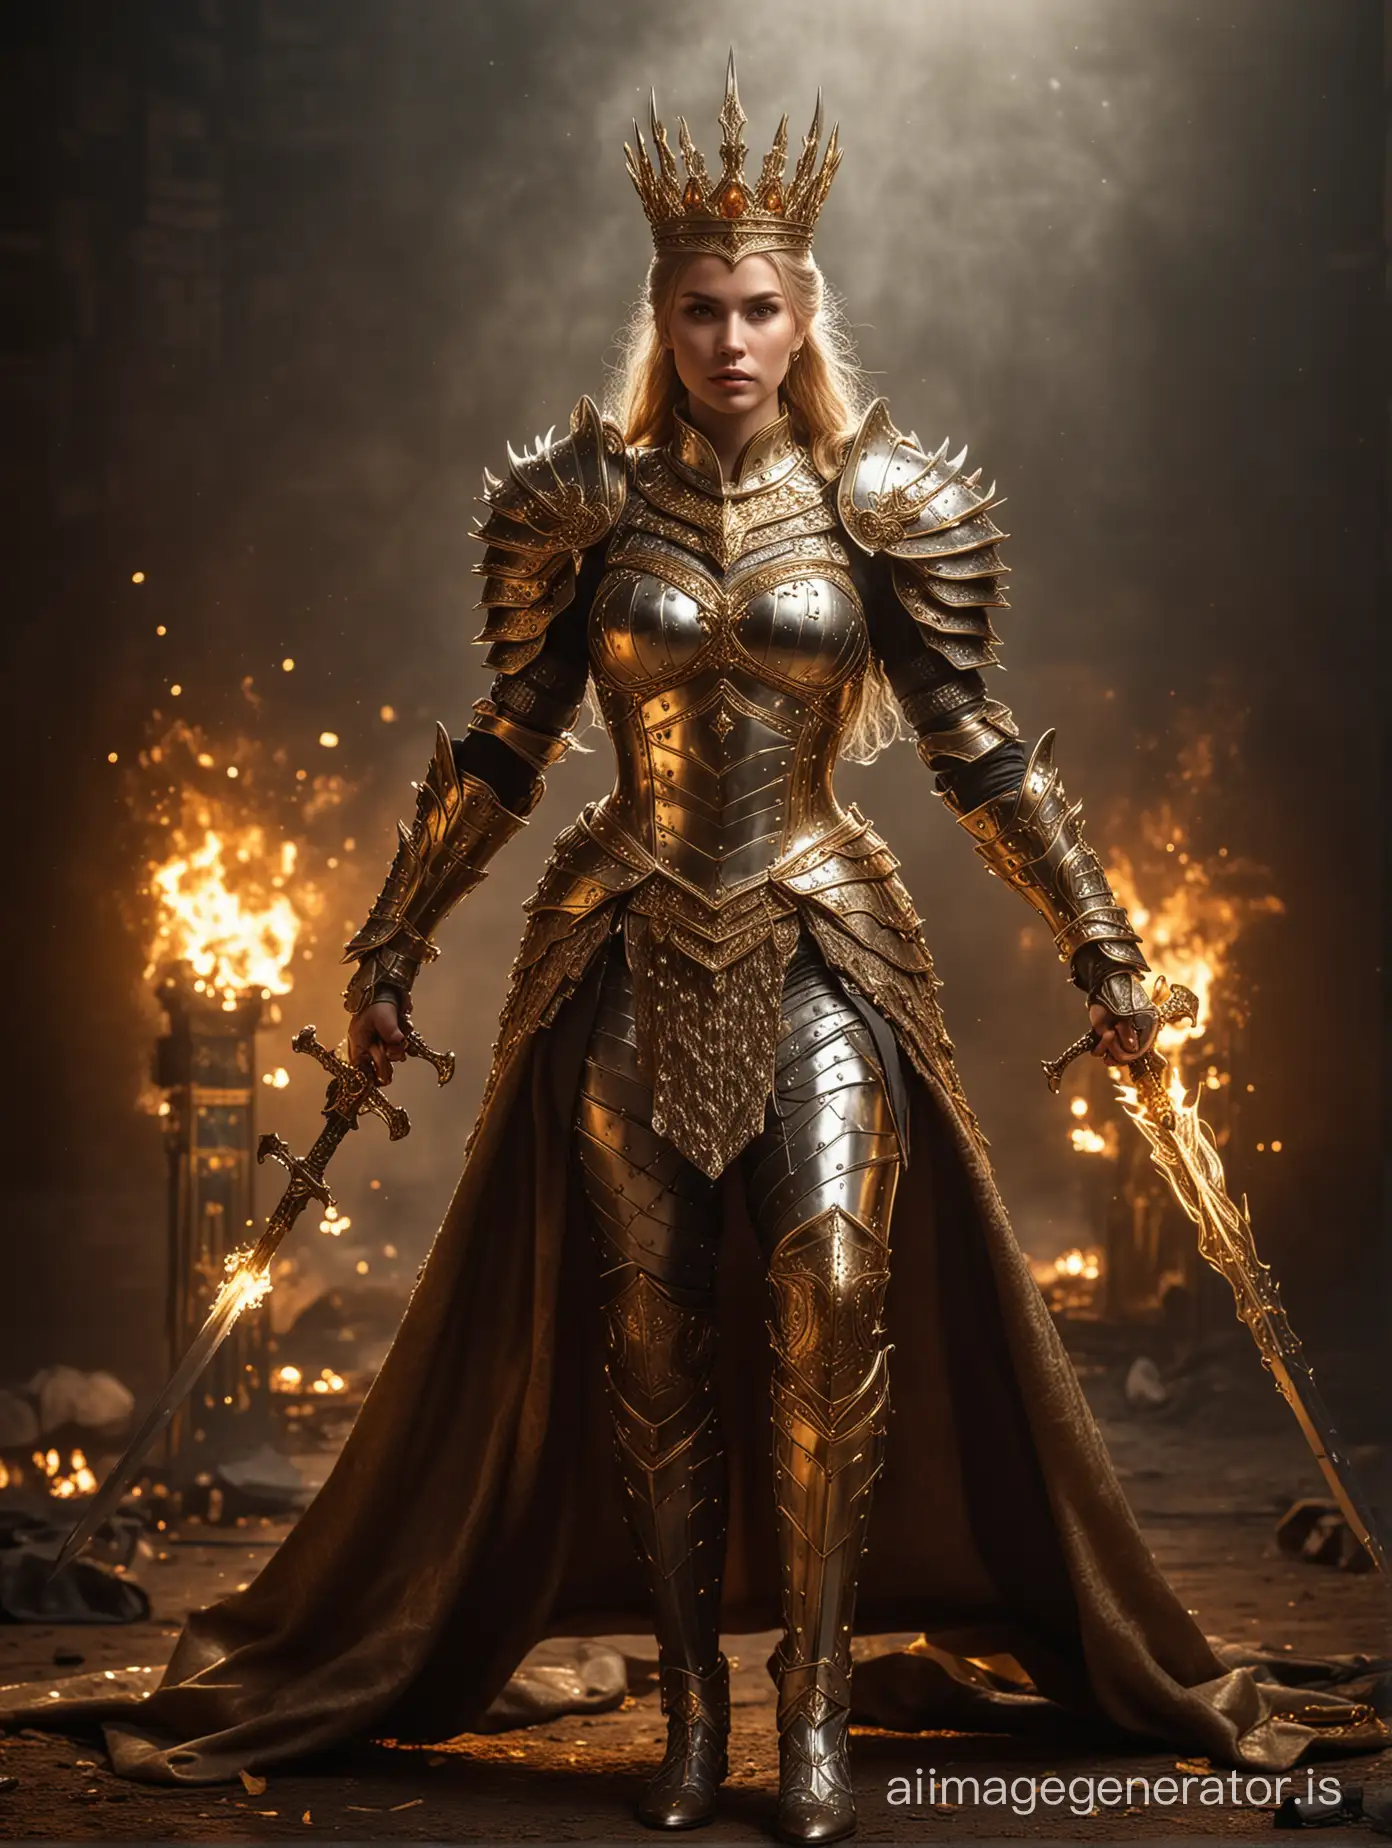 photography full body image of a beautiful queen wearing luxurious steel armor with golden decorations, playing sword king a golden-colored with decorative metalcraft,fire flames, she on standing and exciting expression on battle grounds, army group following run from backside, surrounded by magical lights and effects, dragons flying fire with more details